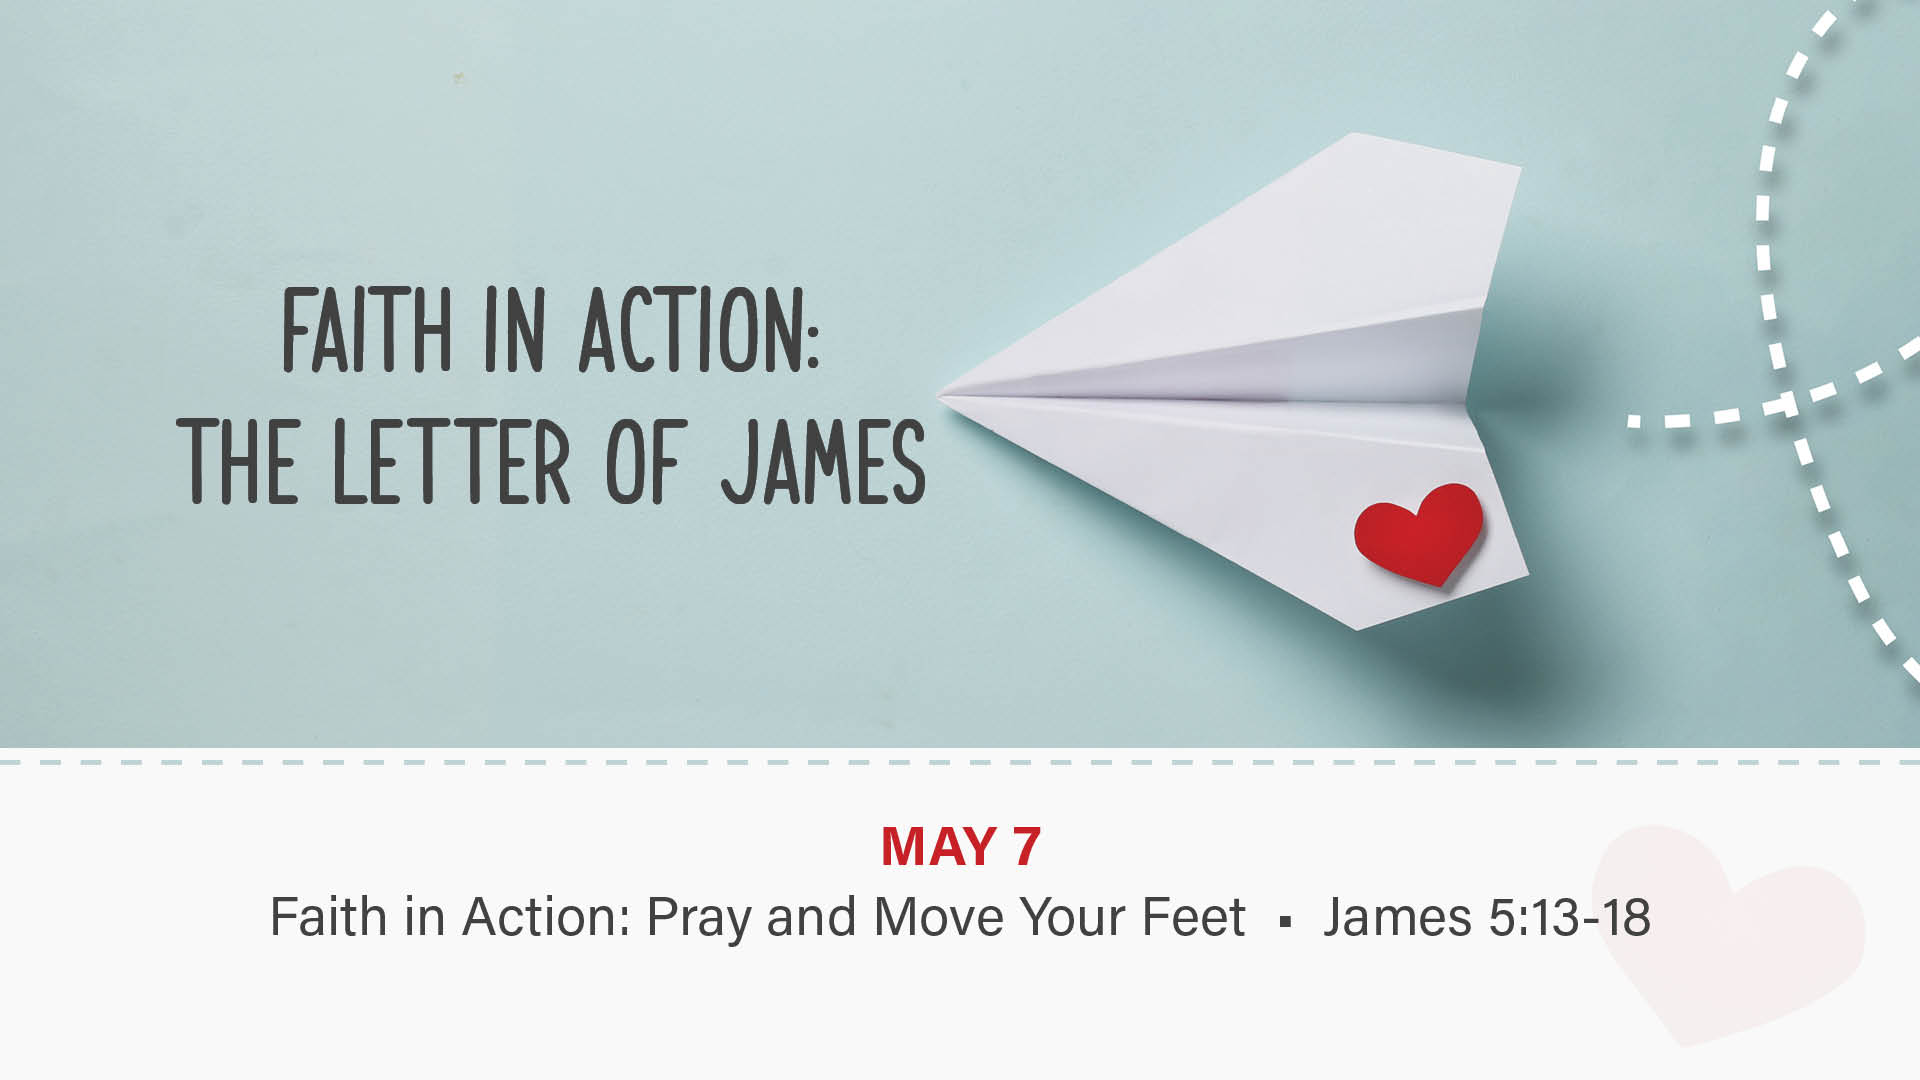 Faith in Action: Pray and Move Your Feet